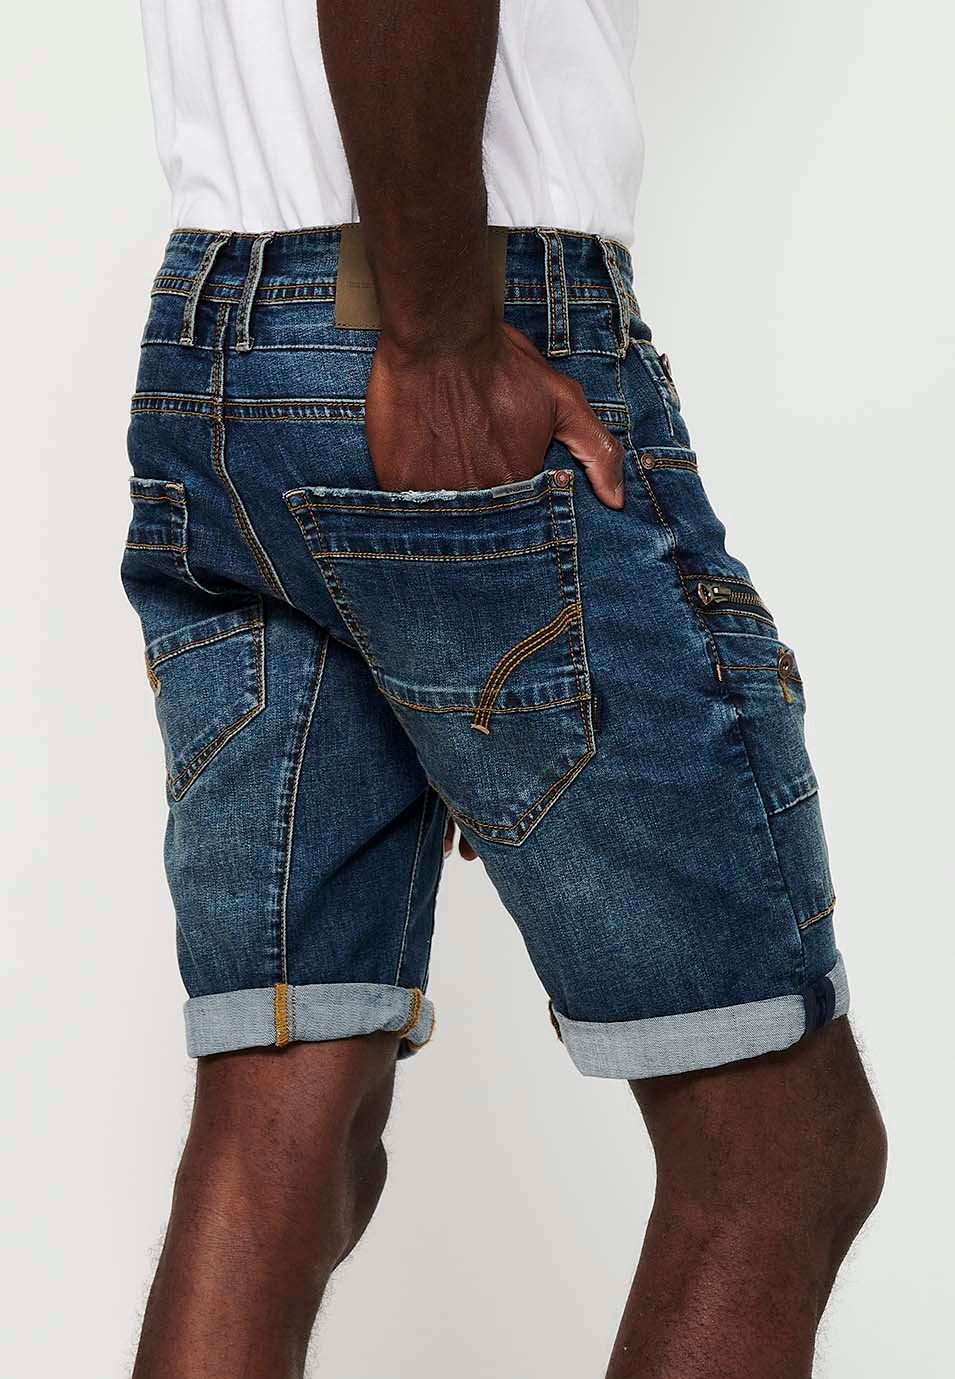 Denim Bermuda Shorts with Turn-Up Finish and Front Zipper and Button Closure with Five Pockets, One Pocket Pocket with Blue Front Details for Men 6